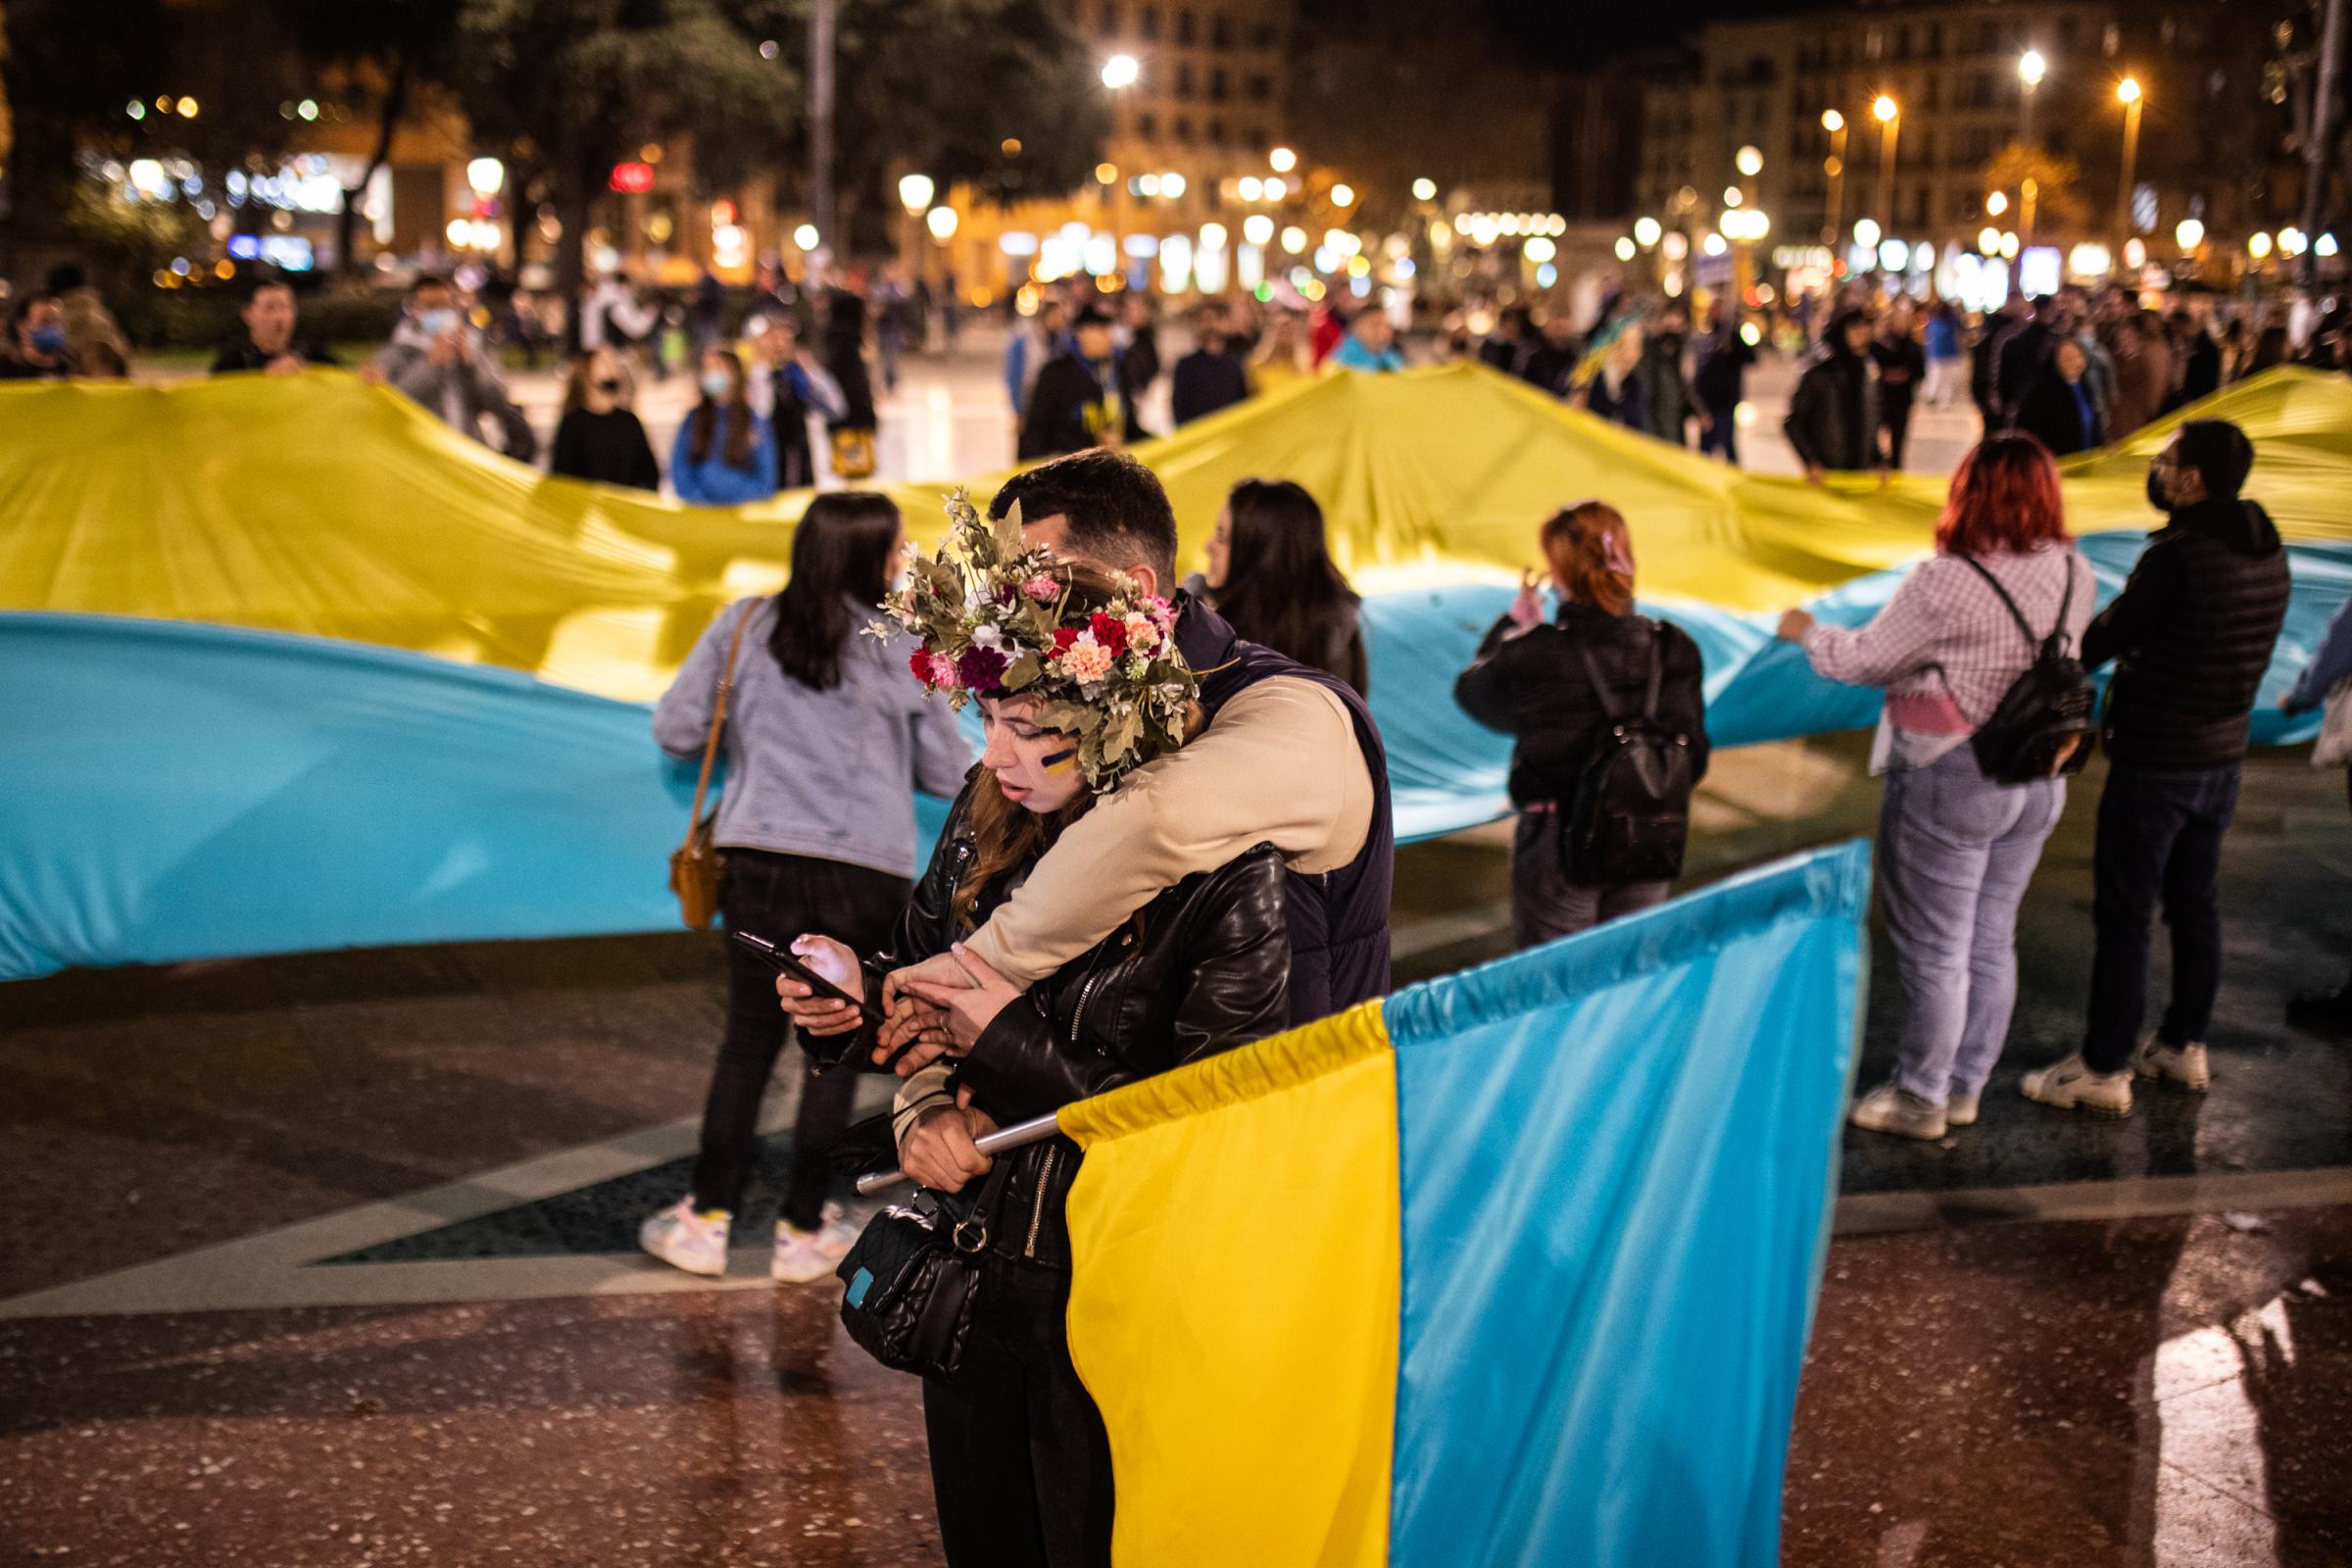 Protestors In Spain Rally For Ukraine After Russian Invasion - BARCELONA, SPAIN - FEBRUARY 27: A couple embrace at a...